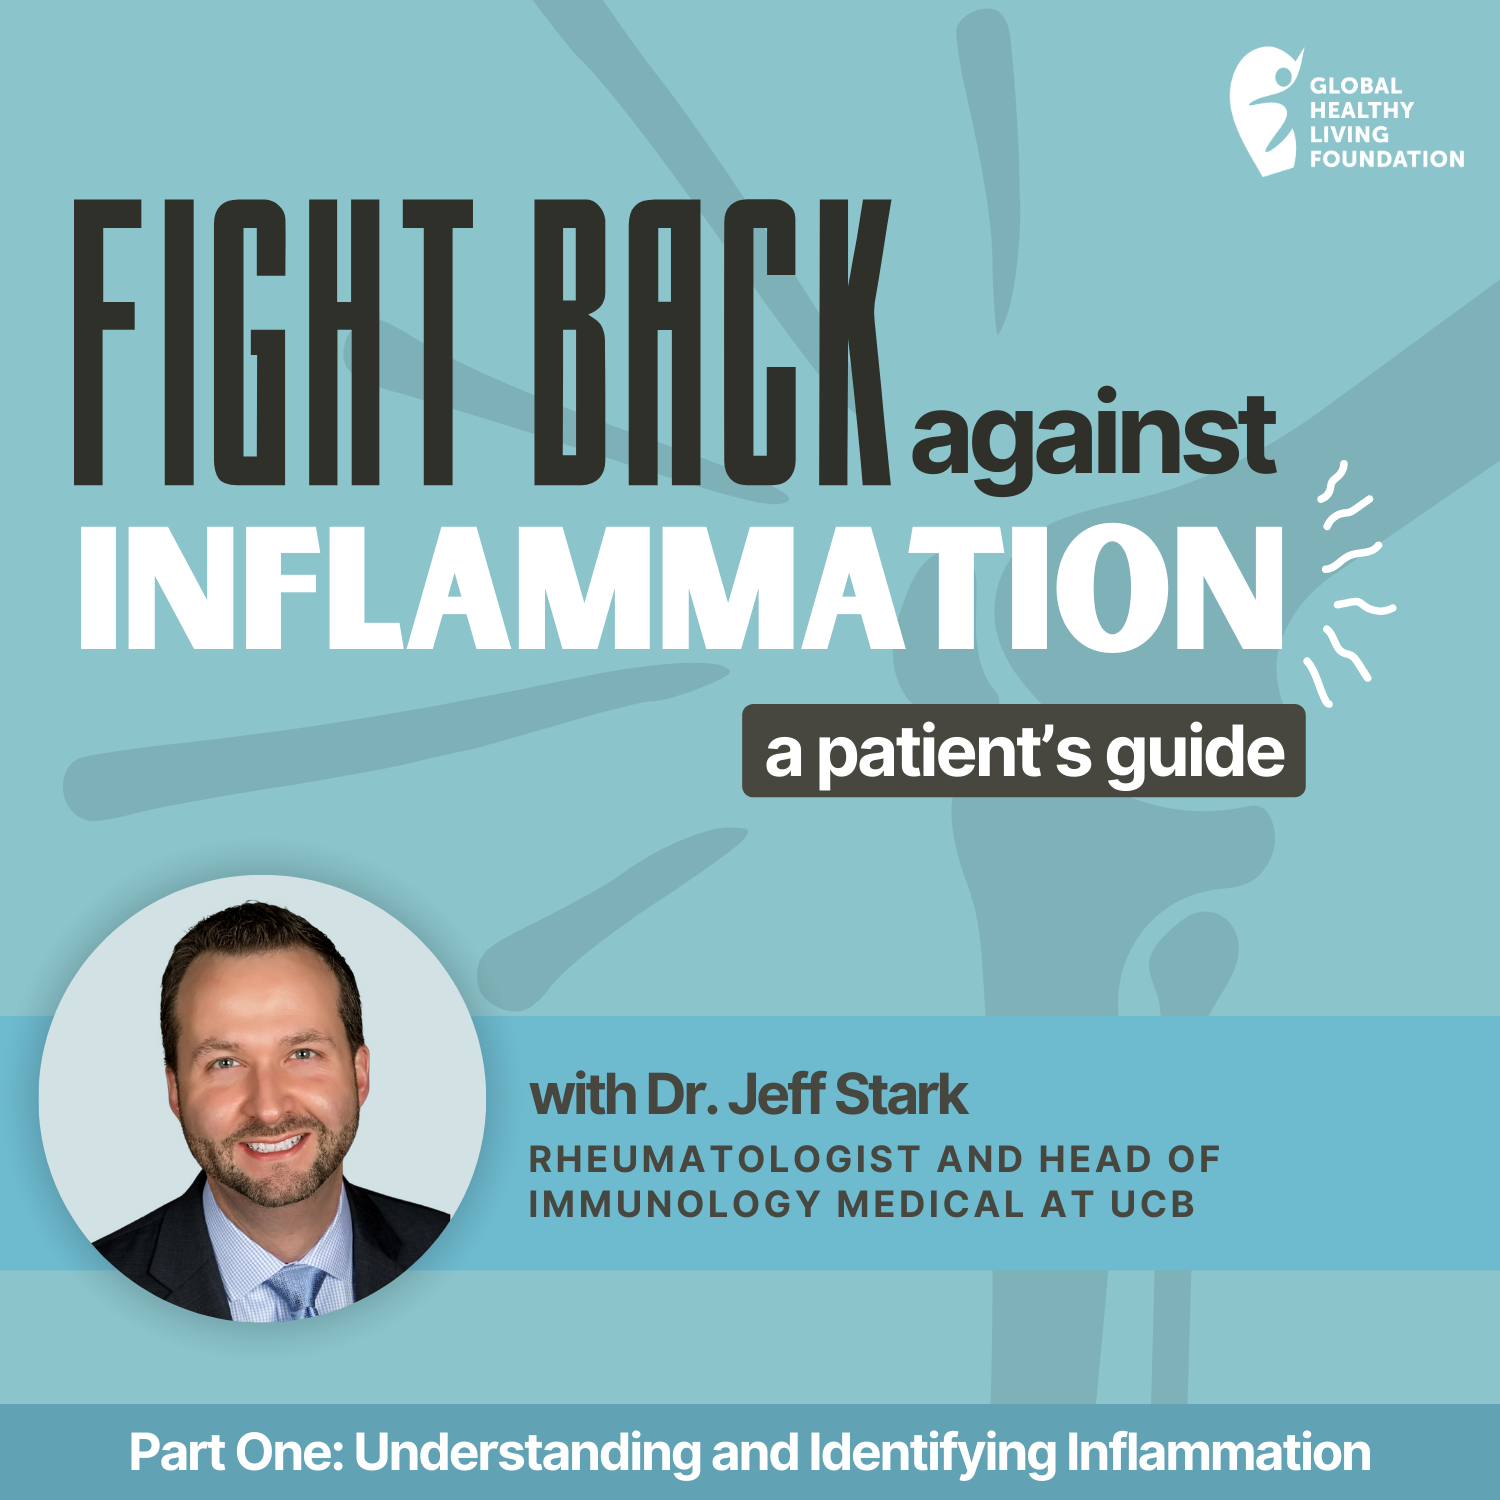 Part One: Understanding and Identifying Inflammation